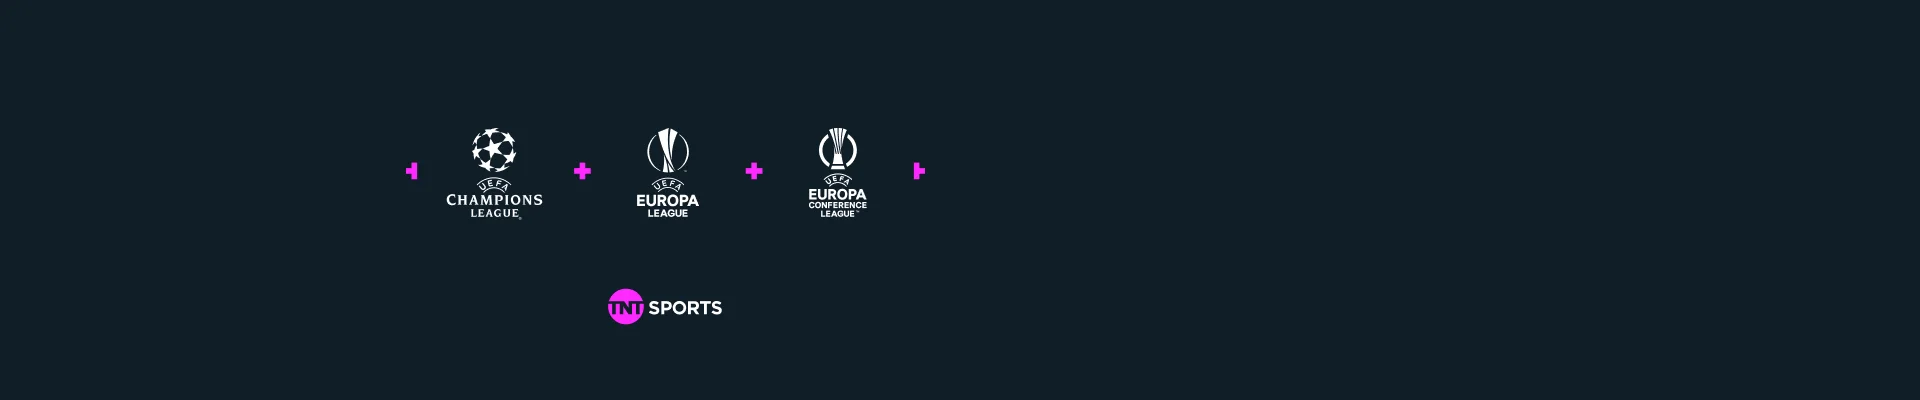 Europa League final stream: free official live video from BT Sport is  'major blow' for online pirates, The Independent